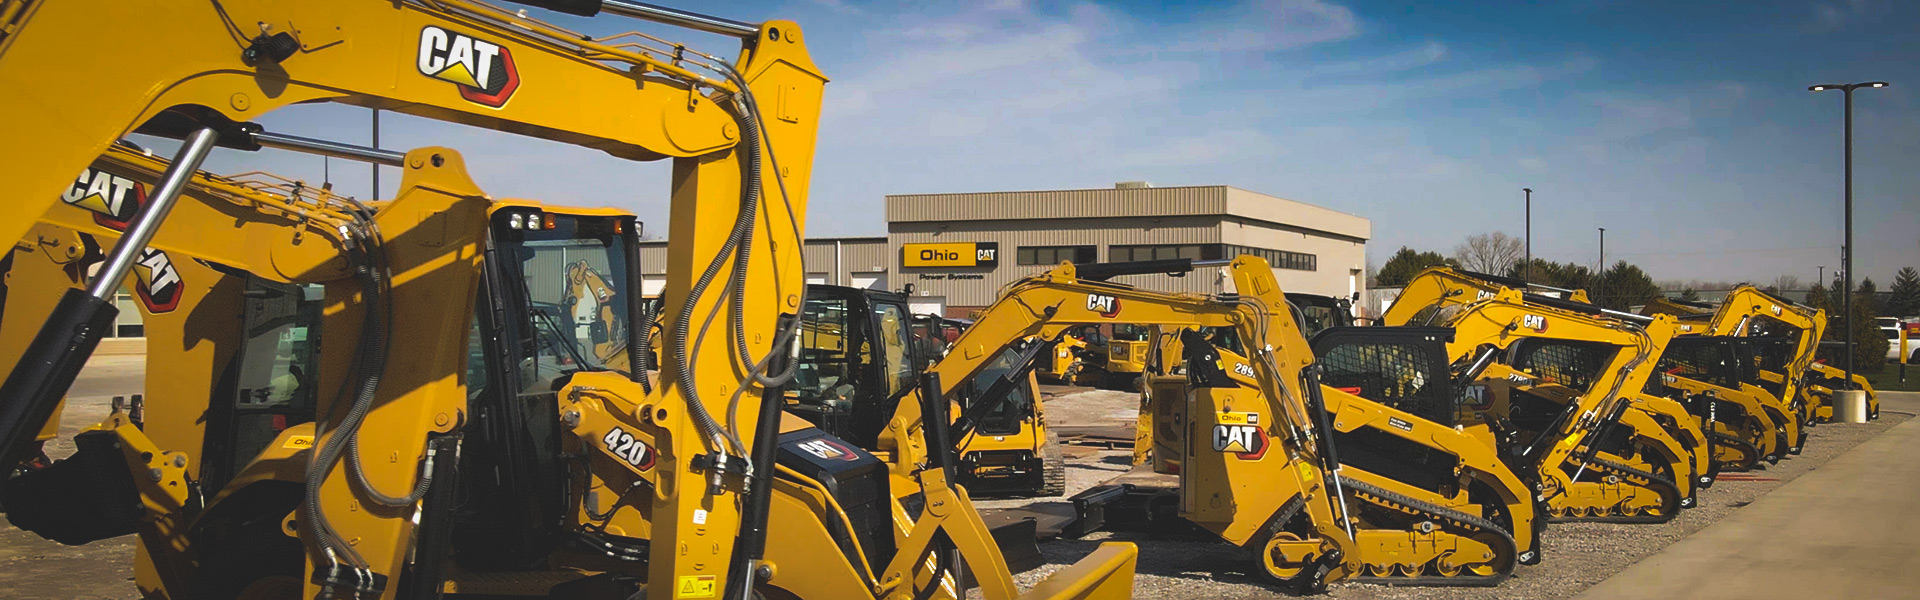 Equipment Rentals and Sales in Cleveland OH